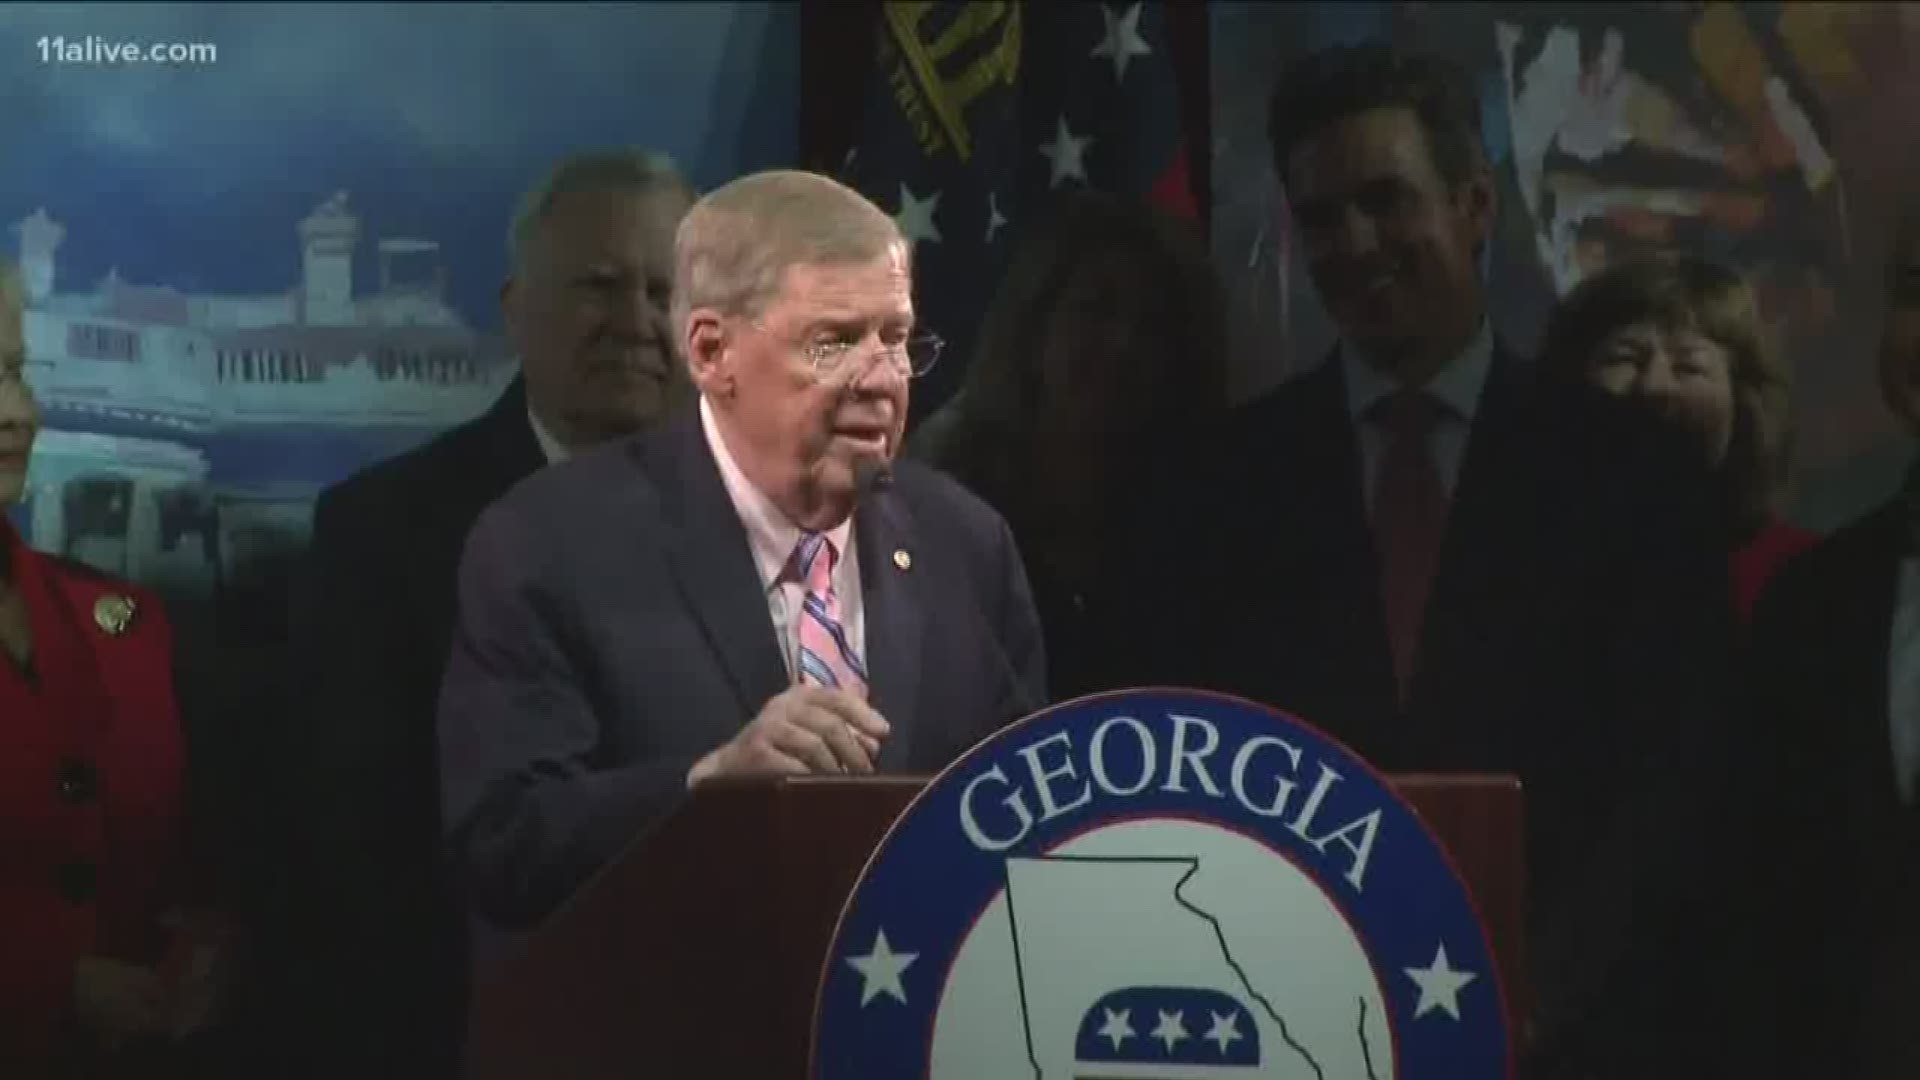 Sen. Johnny Isakson announced he would step down in December because of worsening health issues.